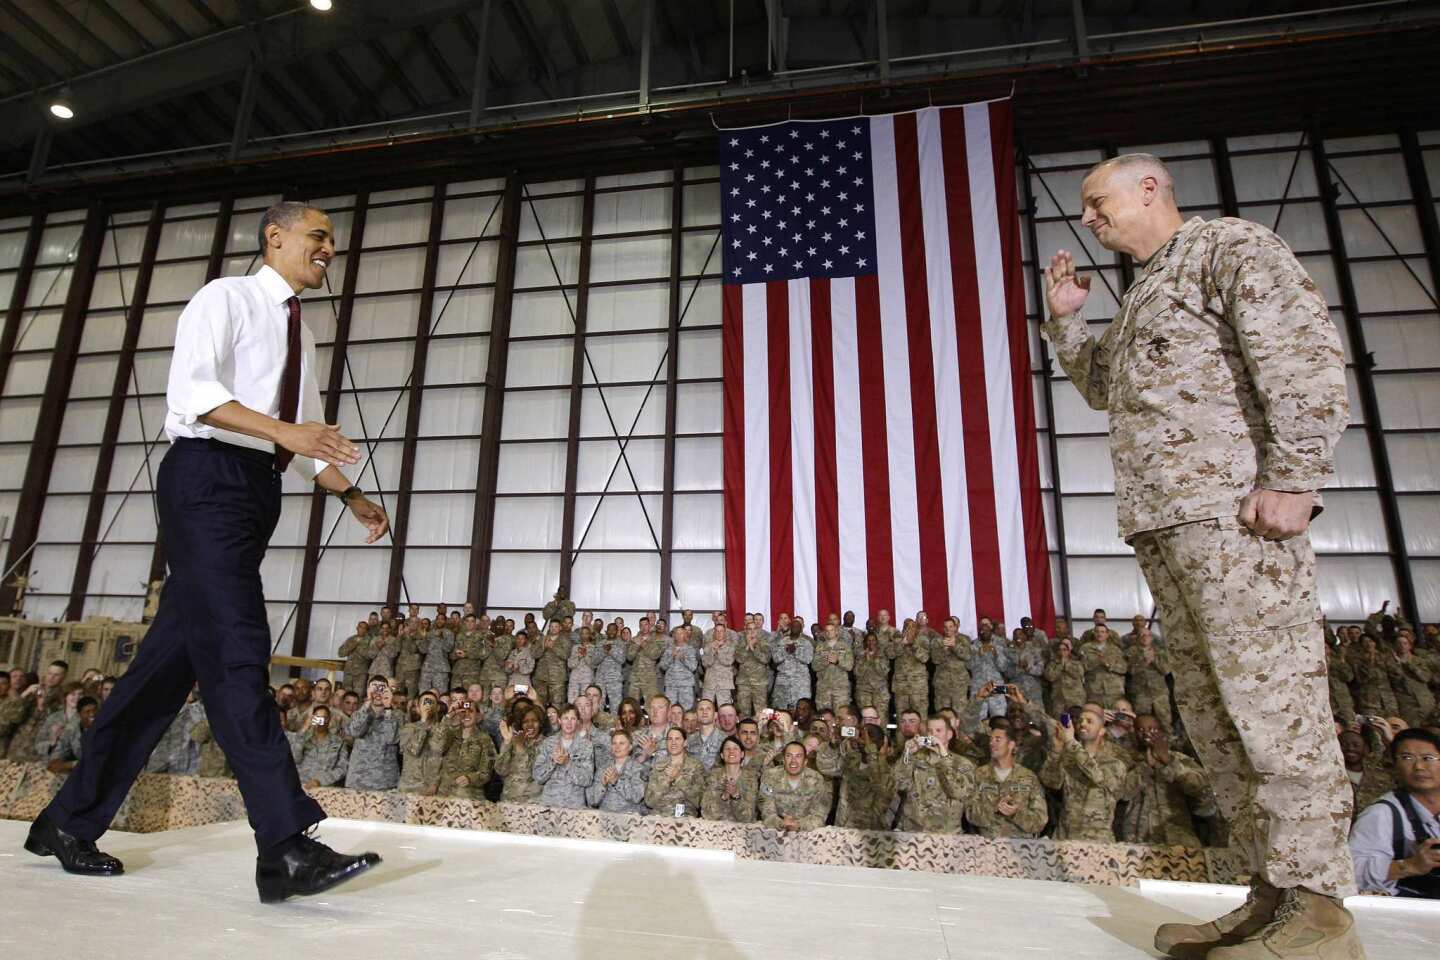 Obama's surprise trip to Afghanistan